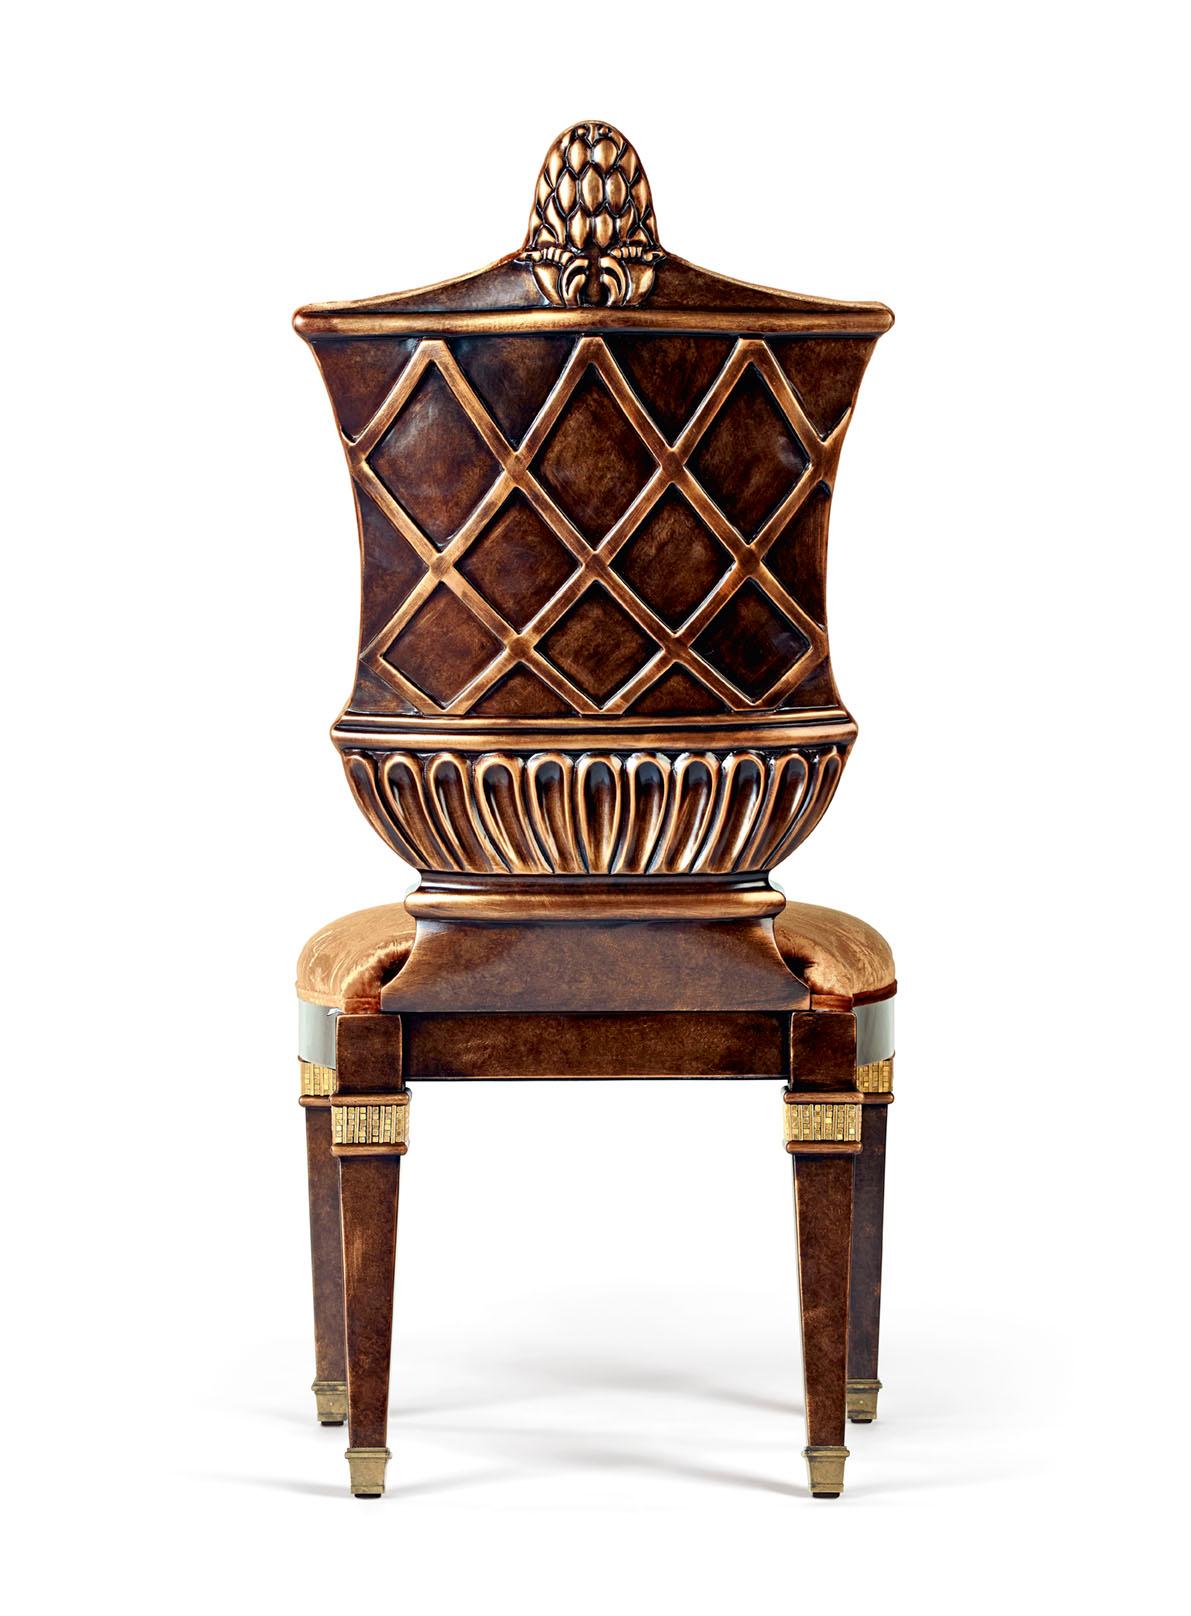 Italian Chair Carved Solidwood Distressed Fonish Bronzed Feet Caps Mosaic Insert Legs For Sale